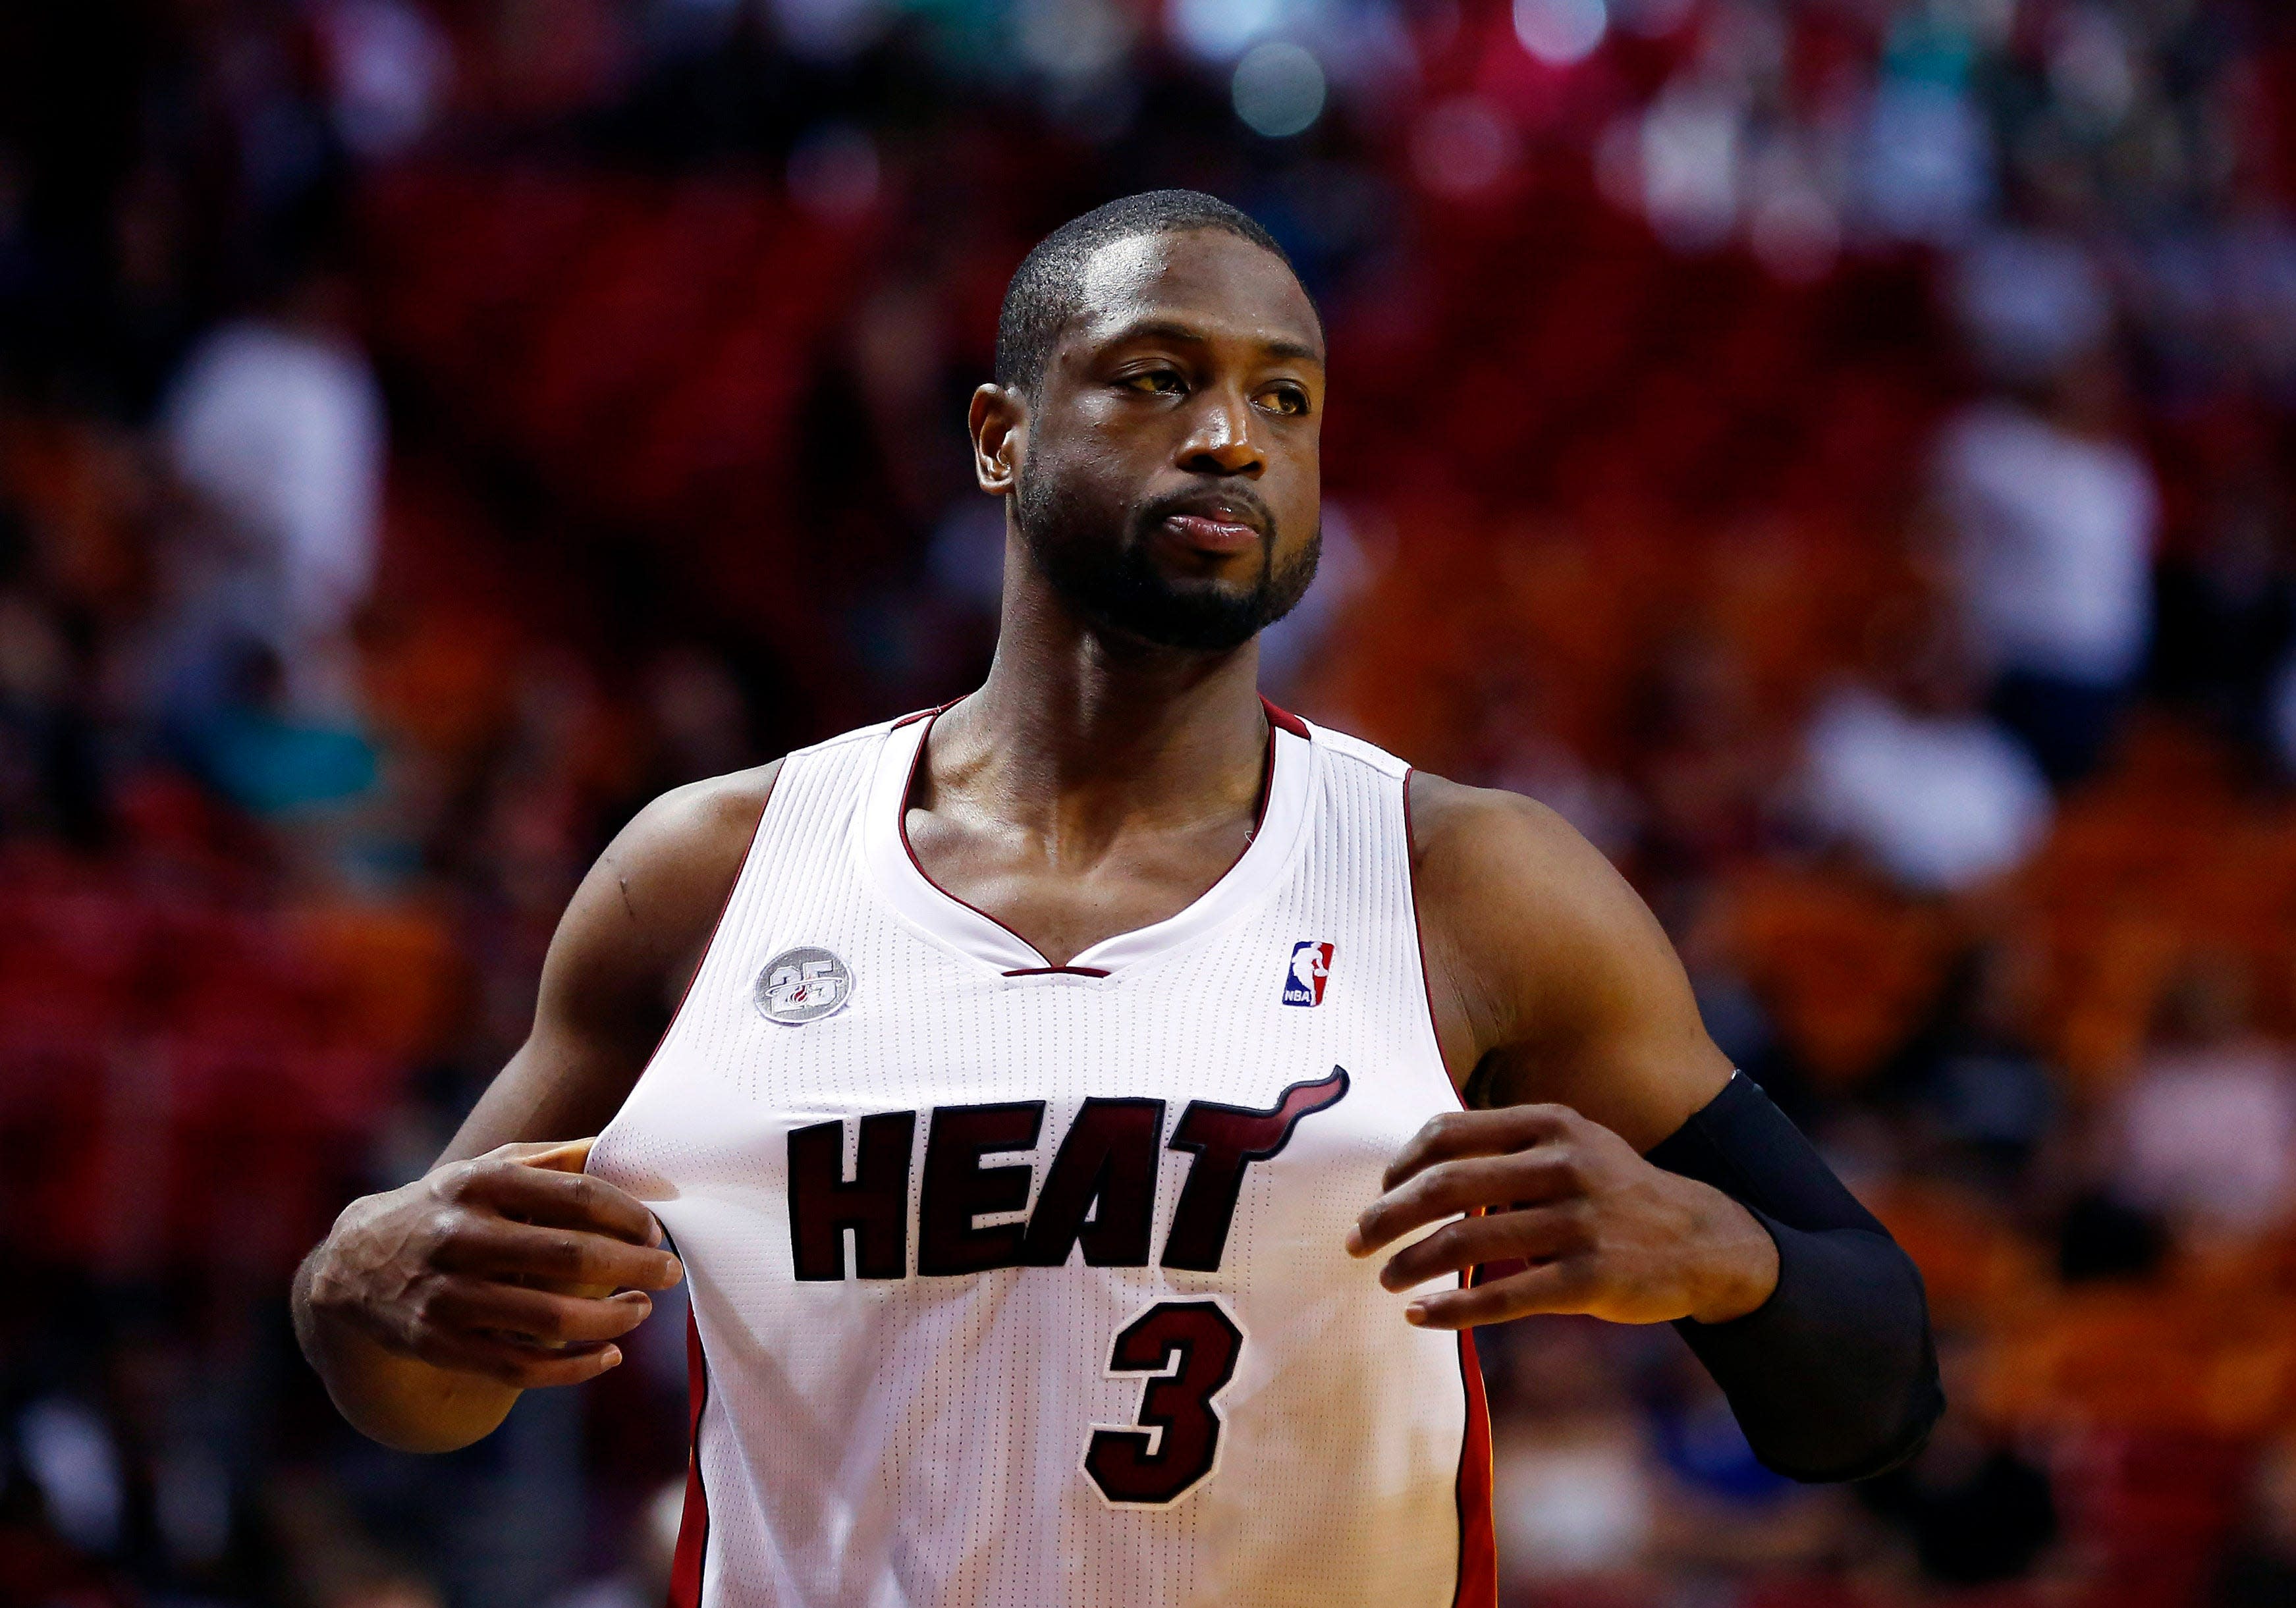 Dwyane Wade shares secret of his post-NBA success on eve of Hall of Fame induction